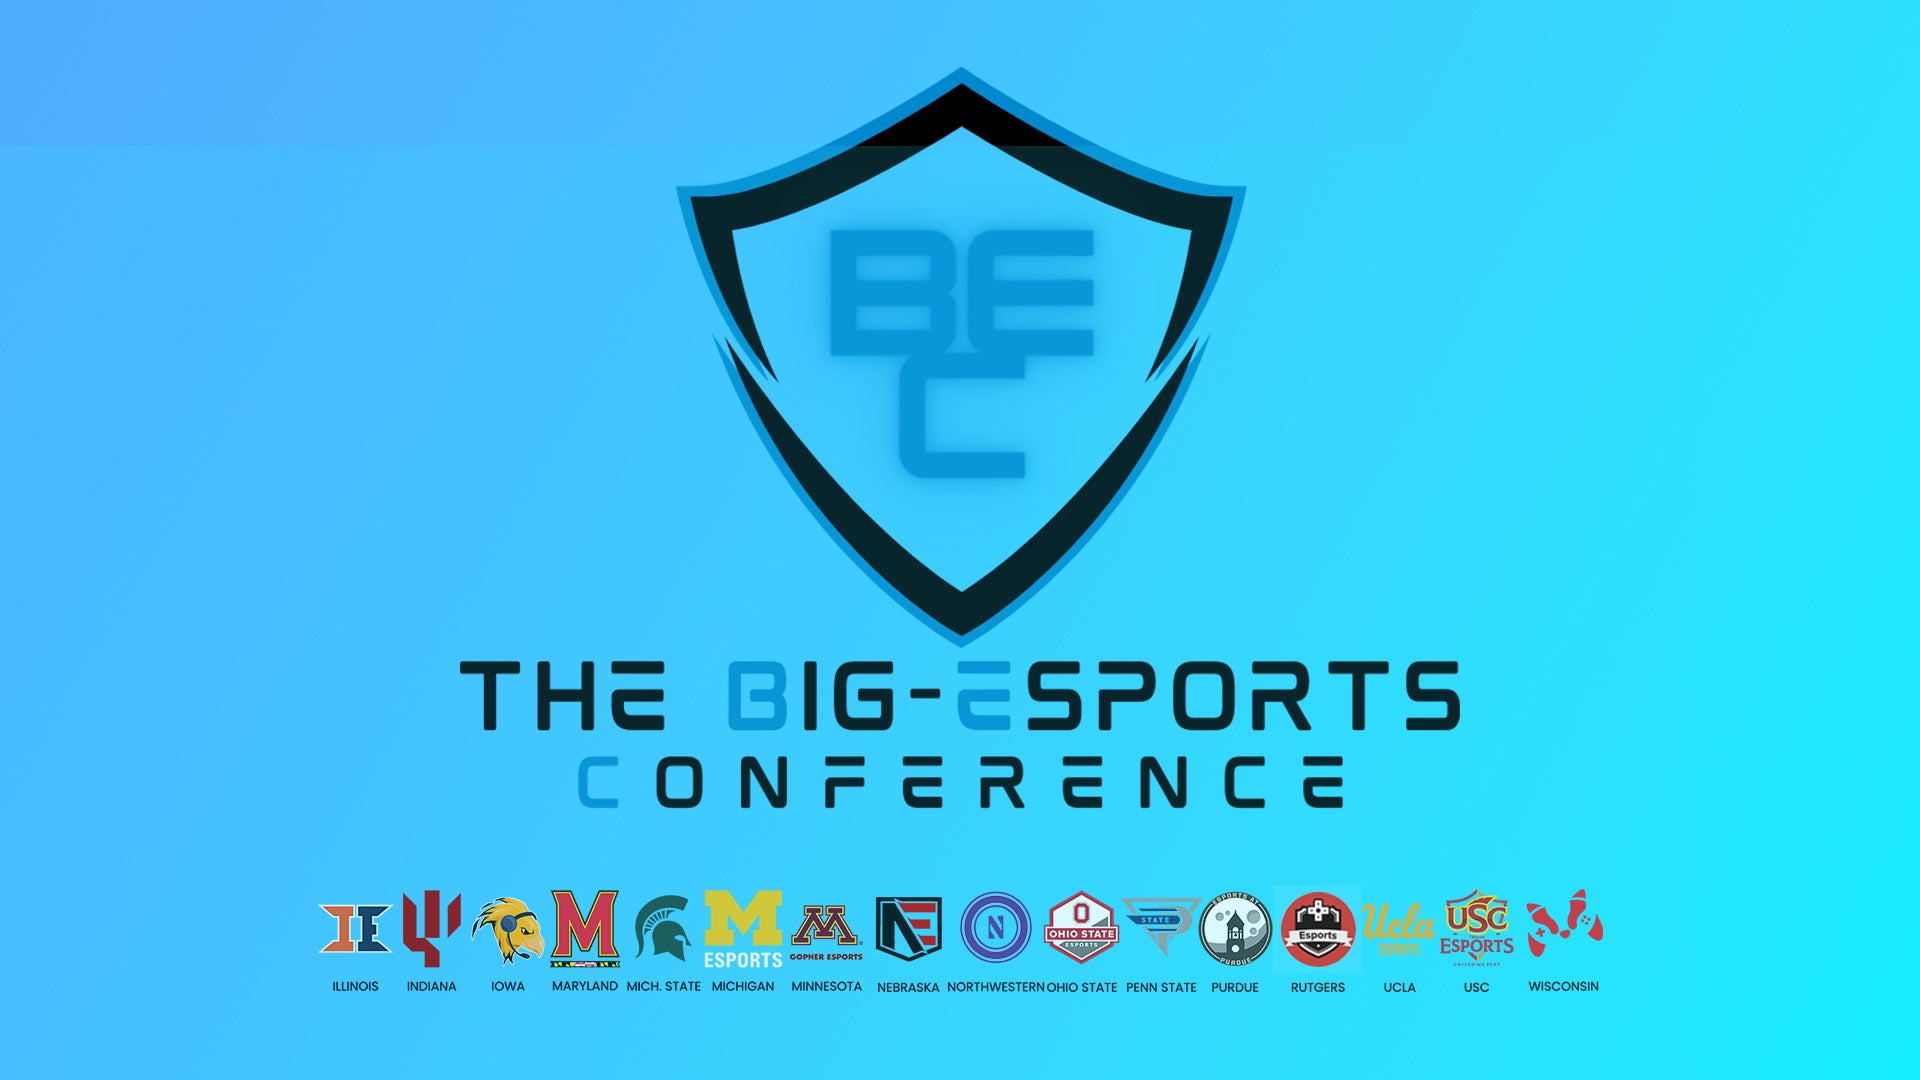 NECC to Support Newly-Formed Big Esports Conference